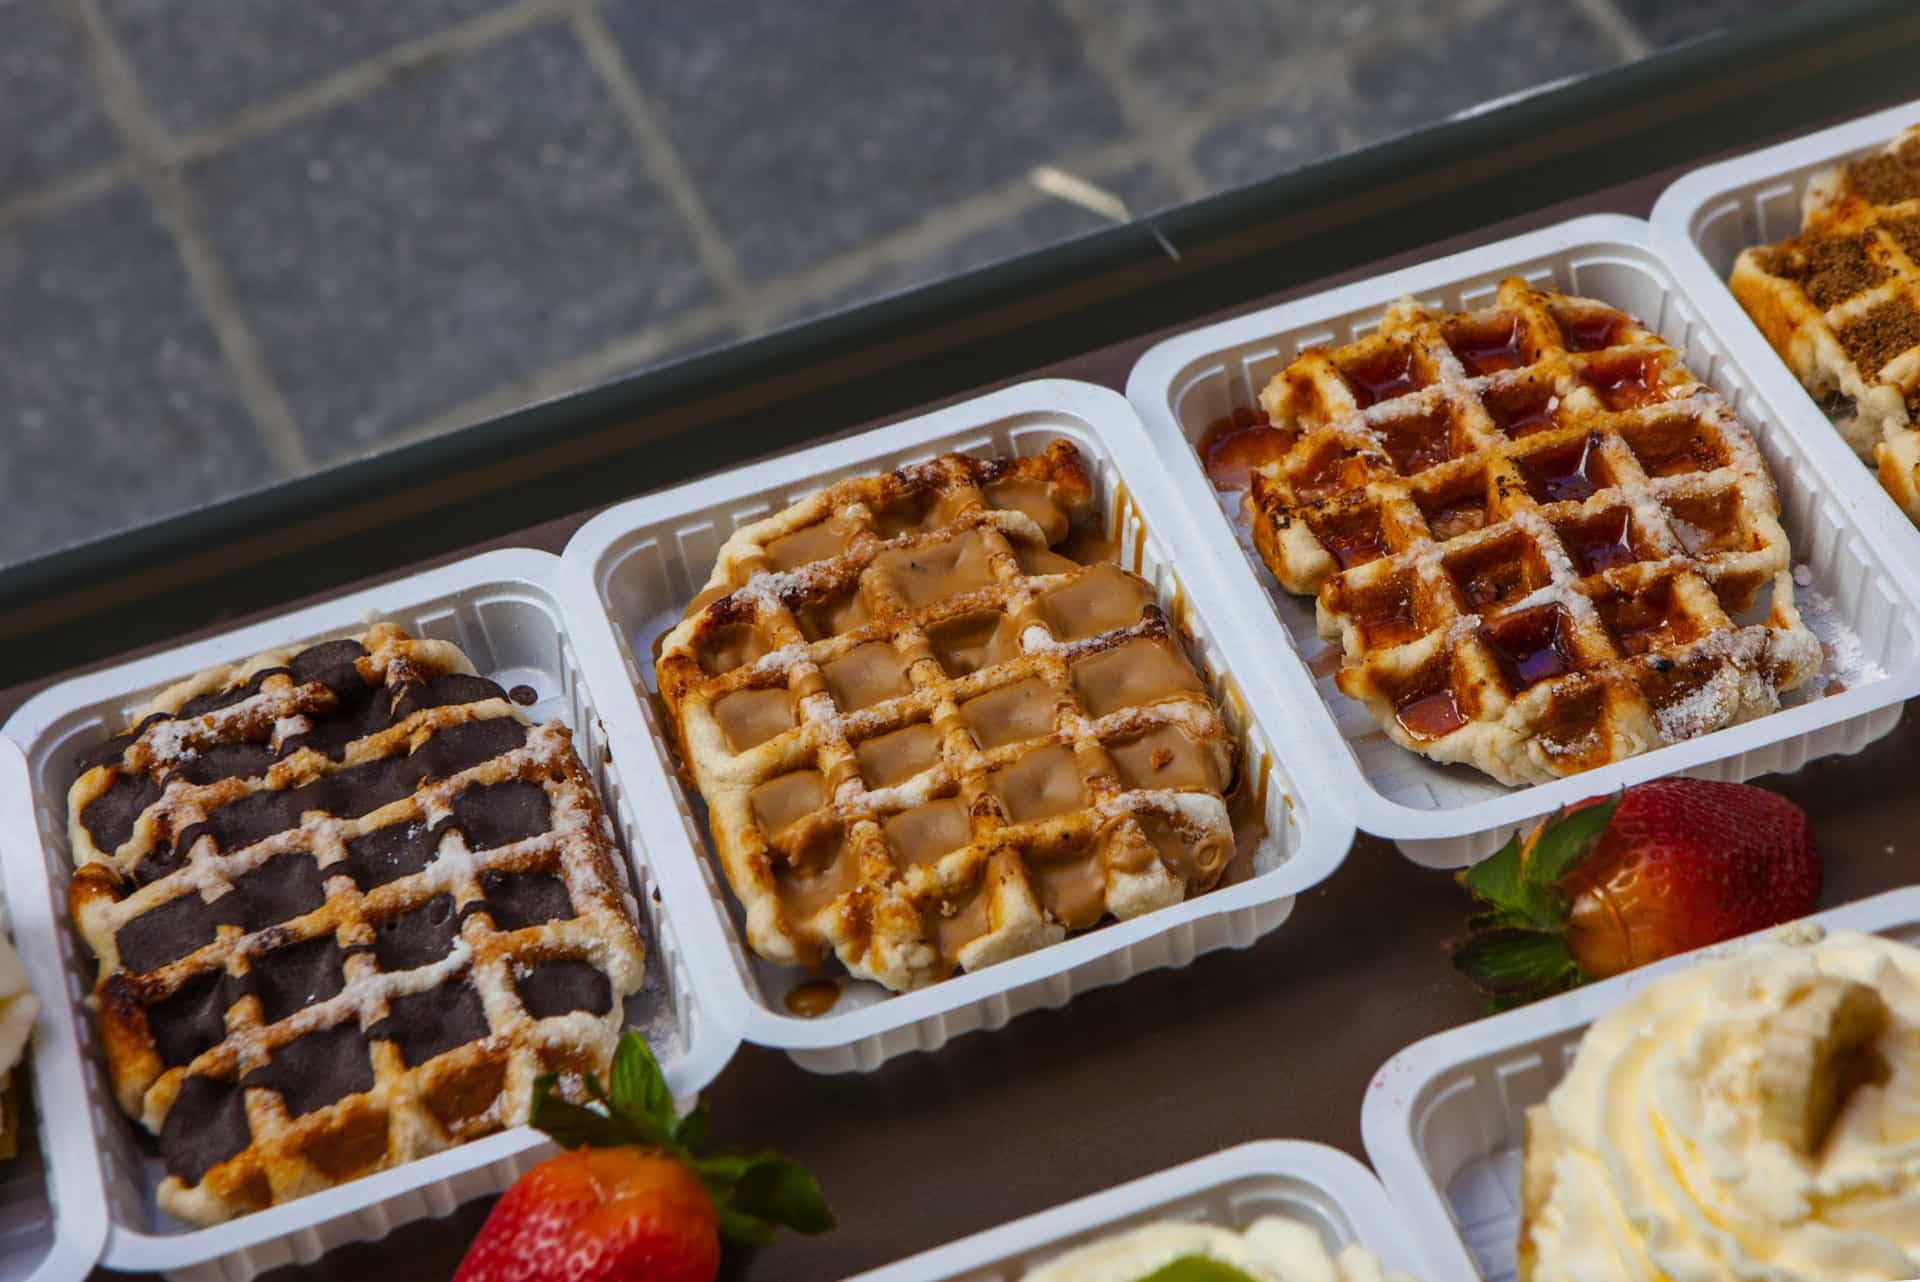 There are different Belgian waffles in the country. When you're in Brussels, ask for a Brussels waffle. But once in Liège, it's a Liège waffle. Either way, they're both delicious!